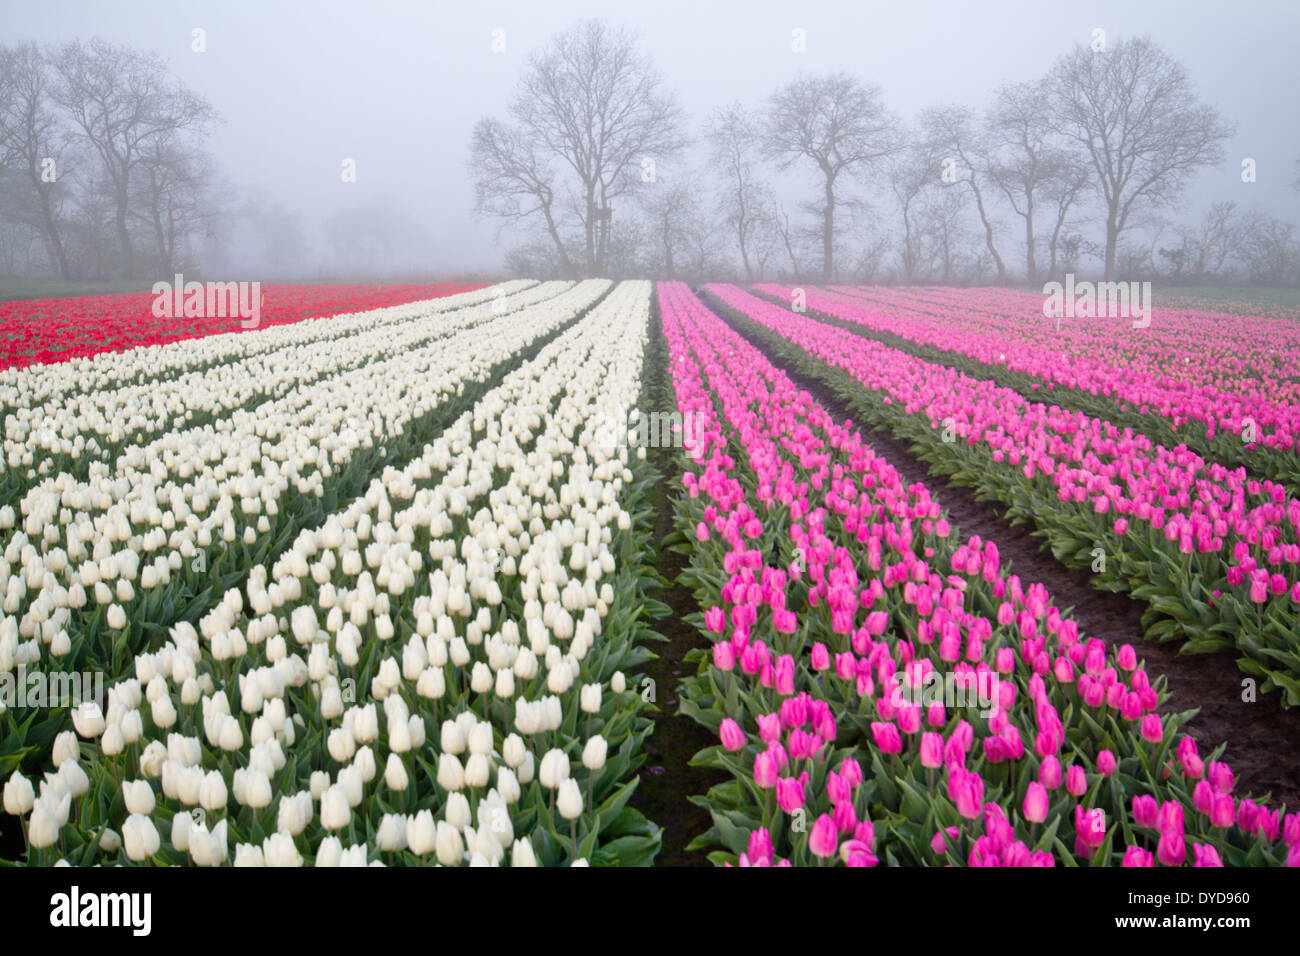 Red, white and pink tulips in rows on a field on a misty morning Stock Photo